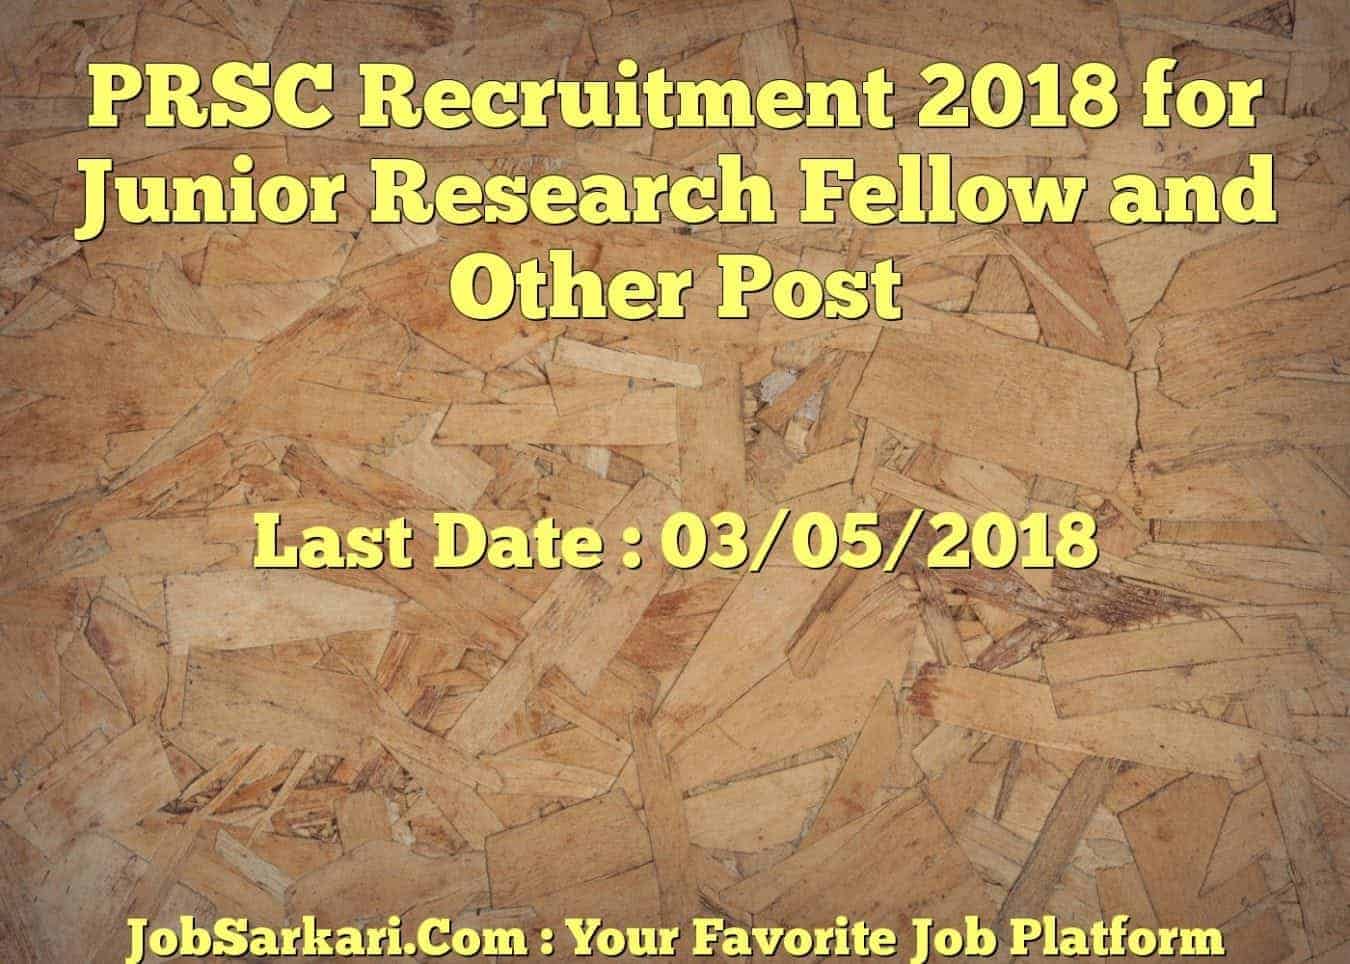 PRSC Recruitment 2018 for Junior Research Fellow and Other Post